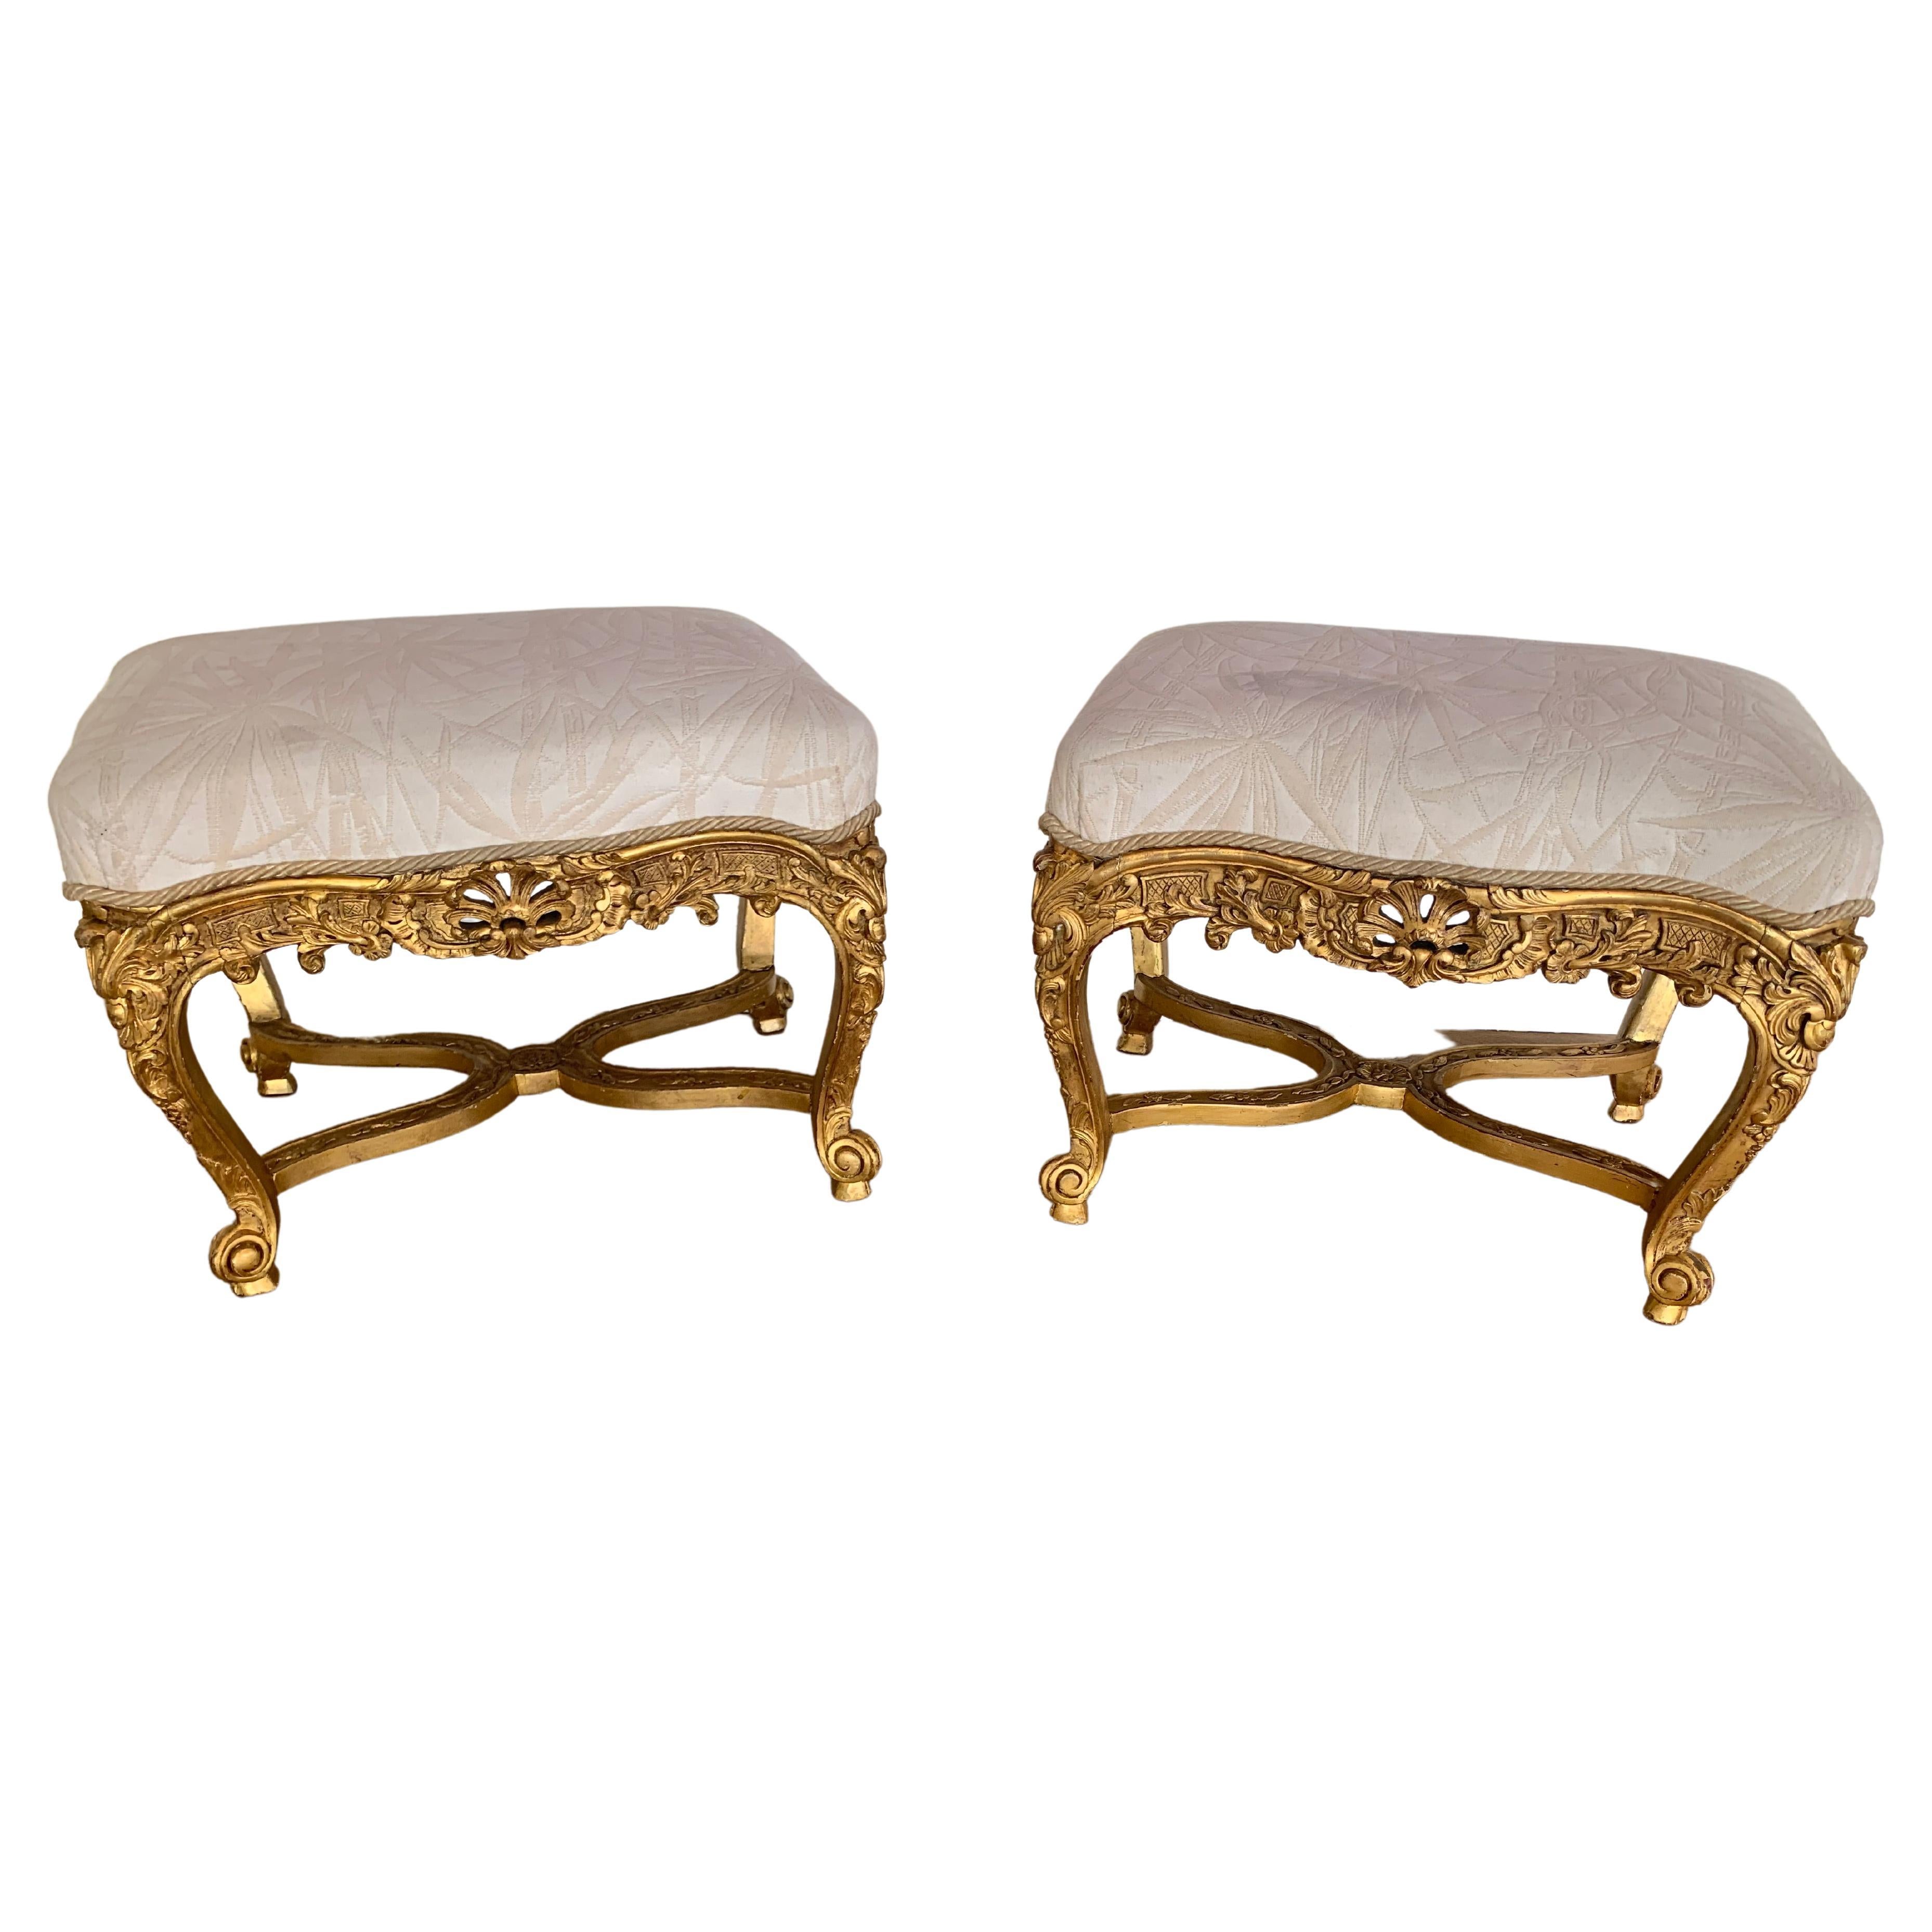 Louis XIV Style Pair of Stools in Giltwood